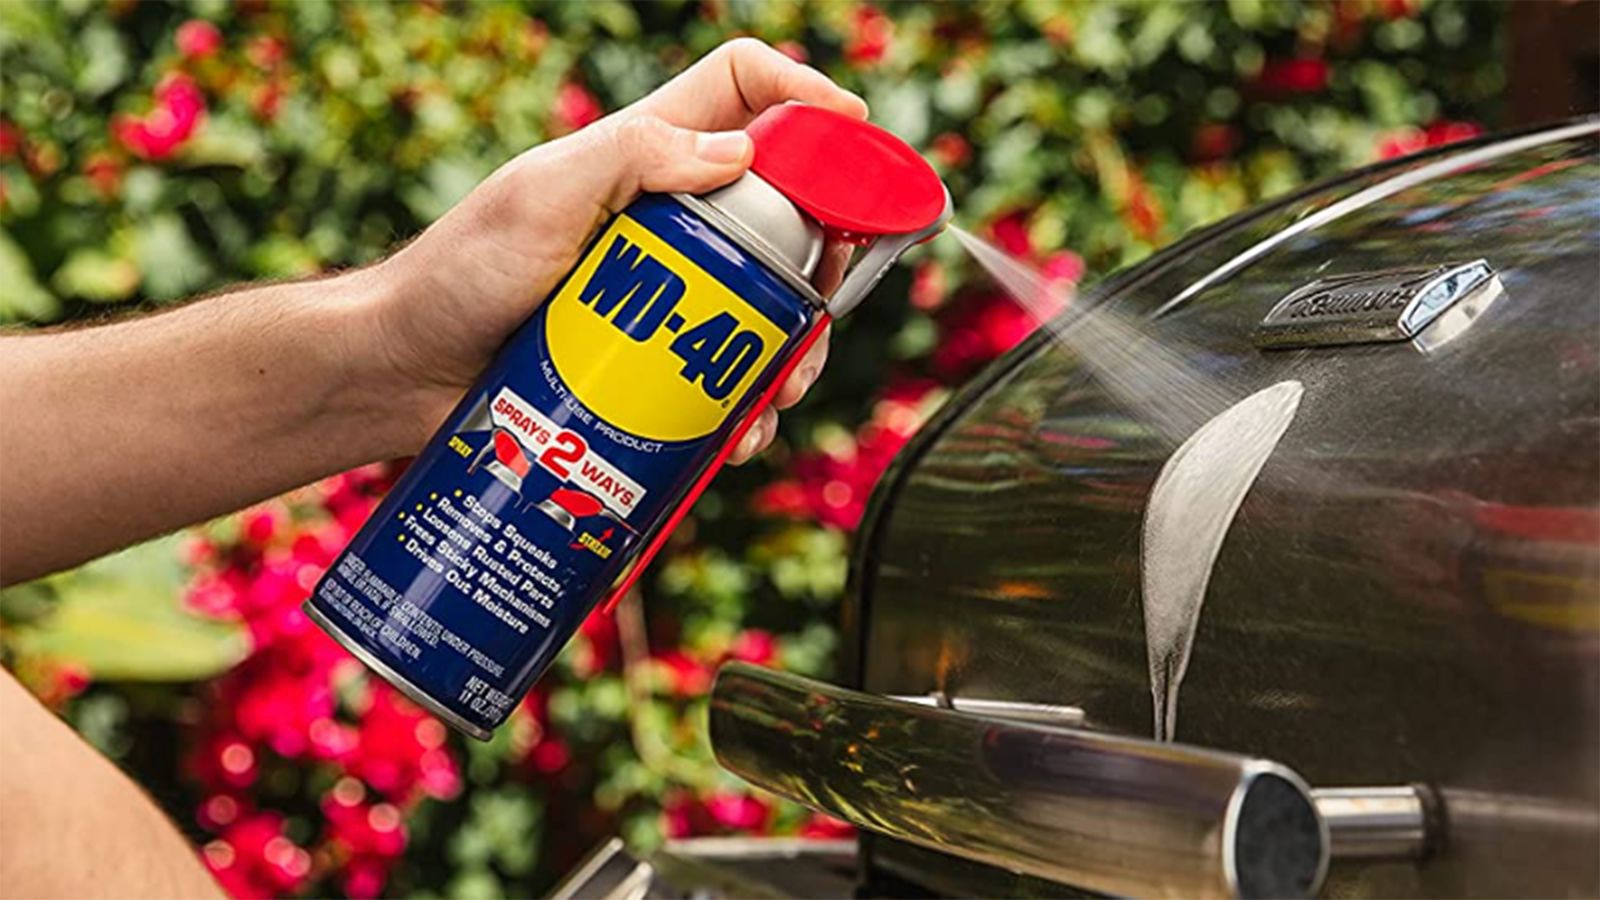 How to Remove Silicone  Your Guide - WD-40 Australia